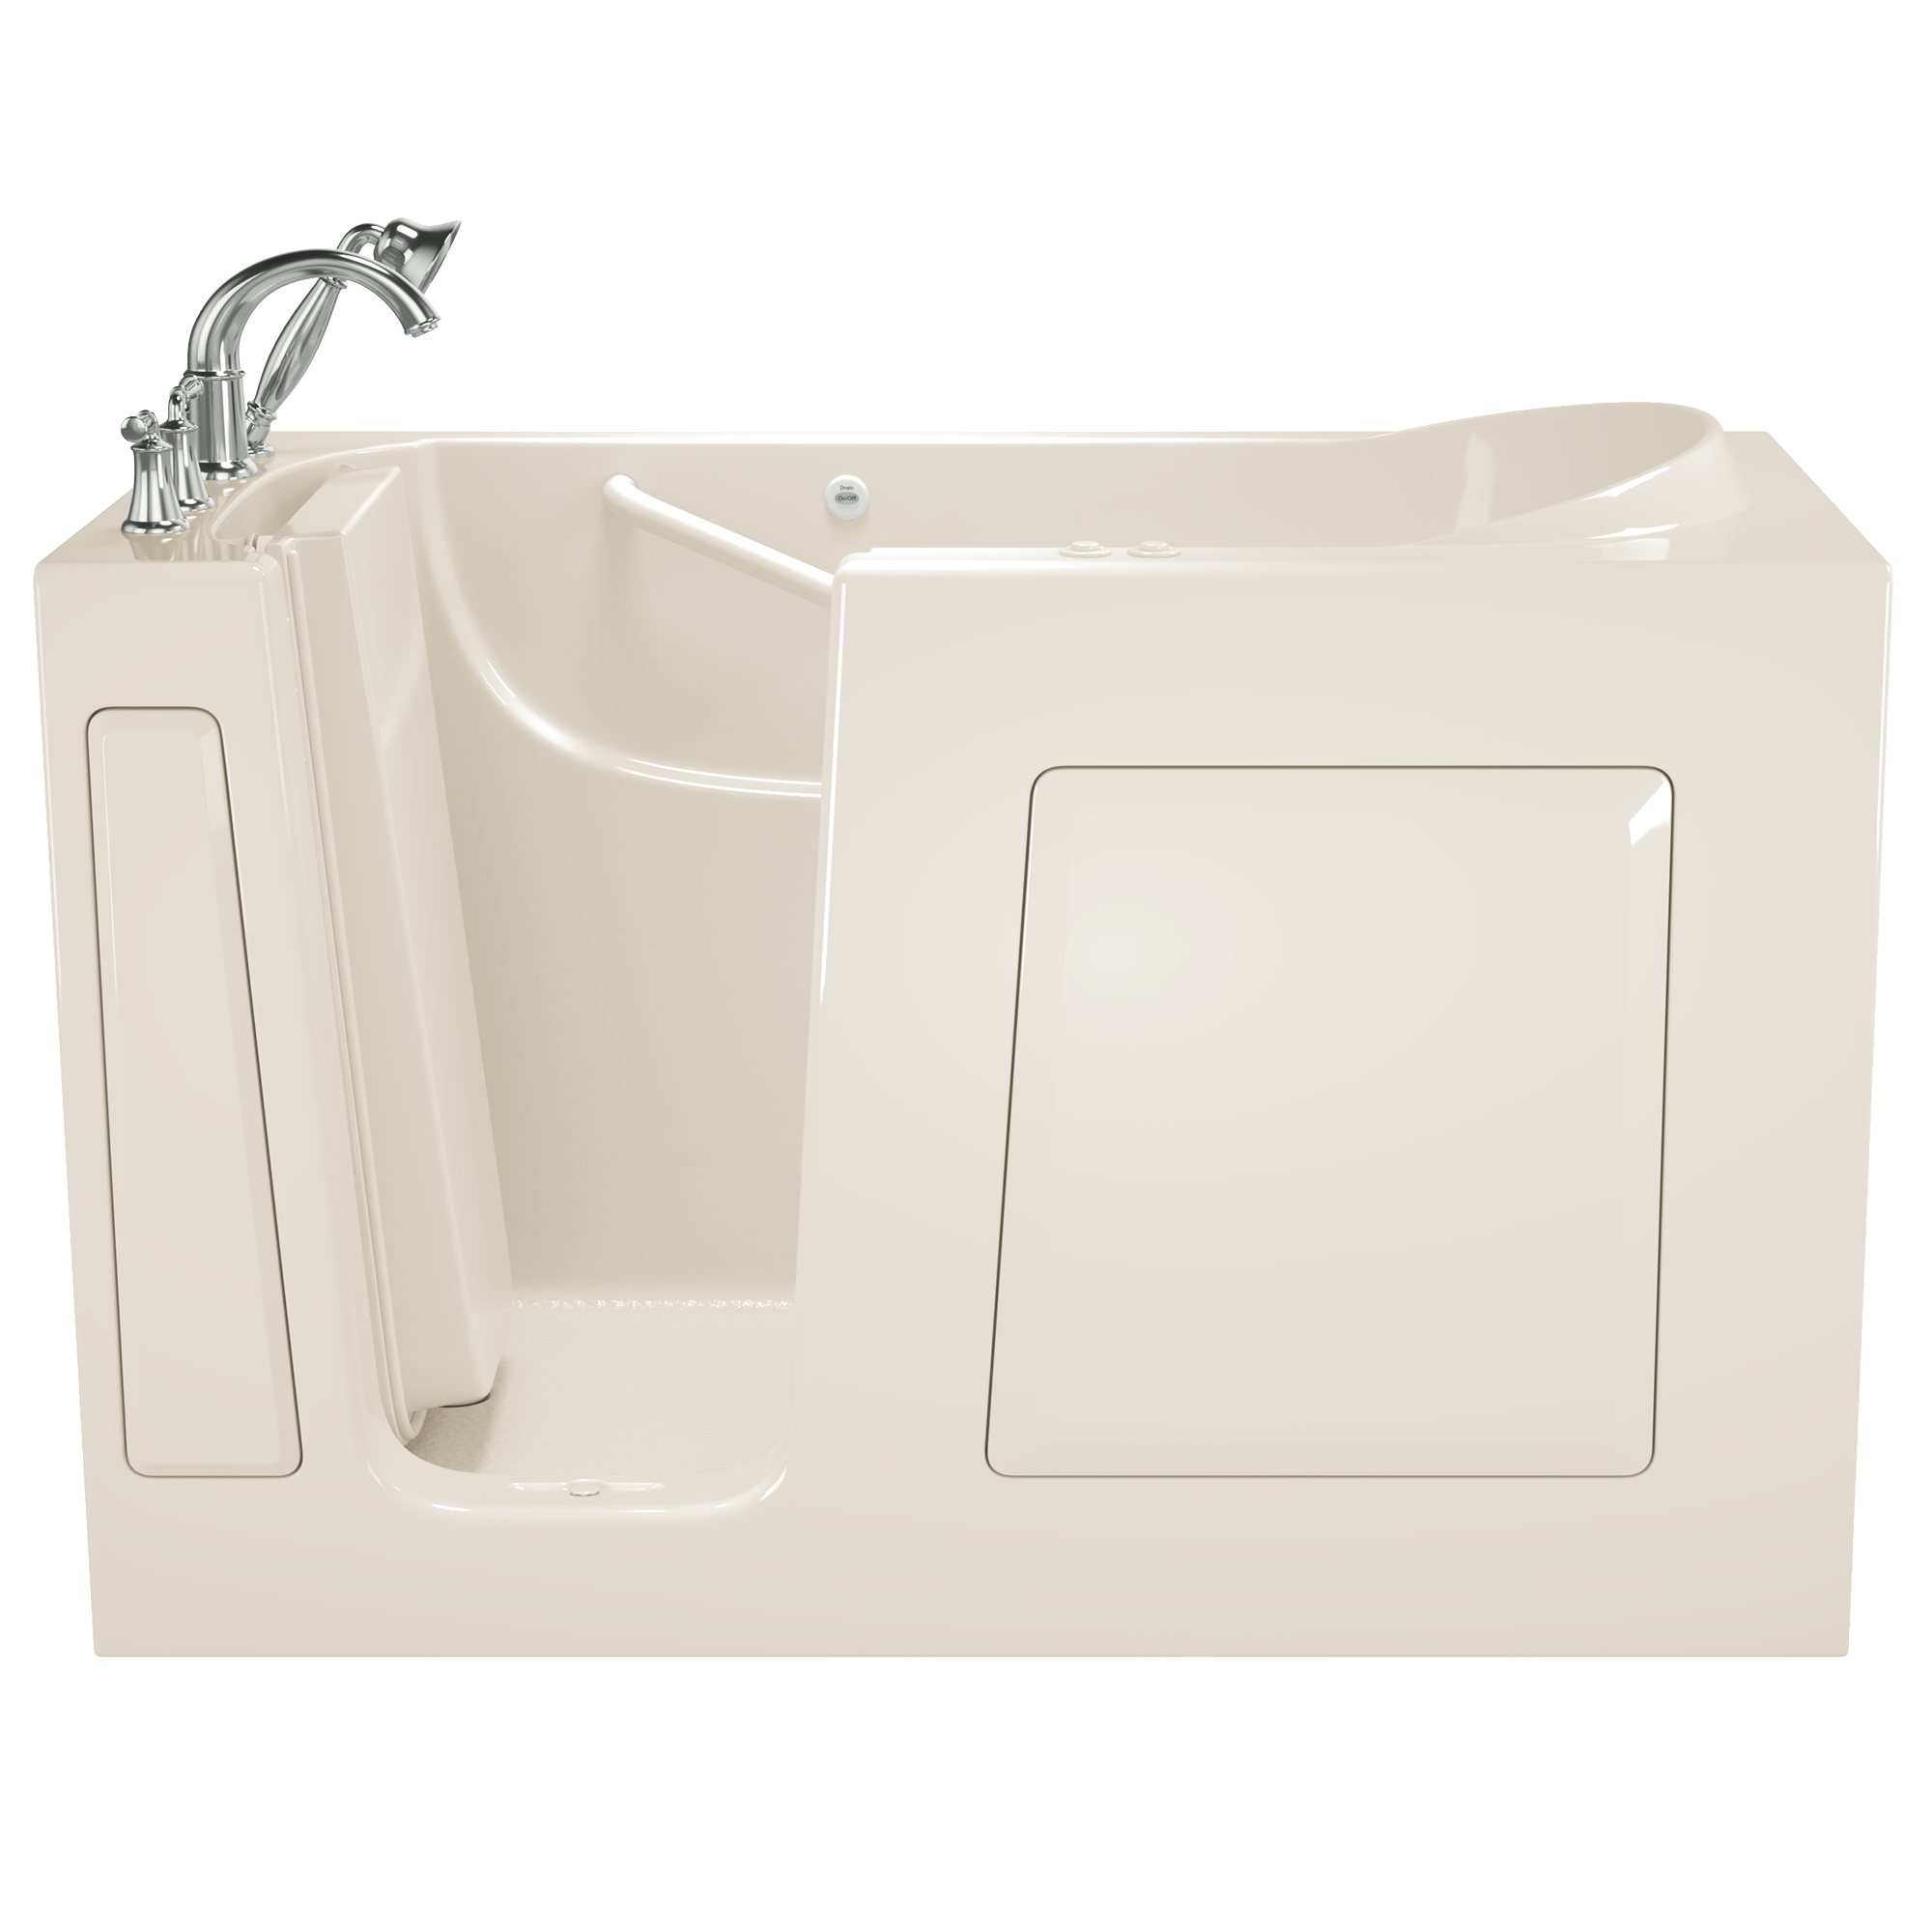 Gelcoat Value Series 30 x 60  Inch Walk in Tub With Combination Air Spa and Whirlpool Systems   Left Hand Drain With Faucet WIB LINEN